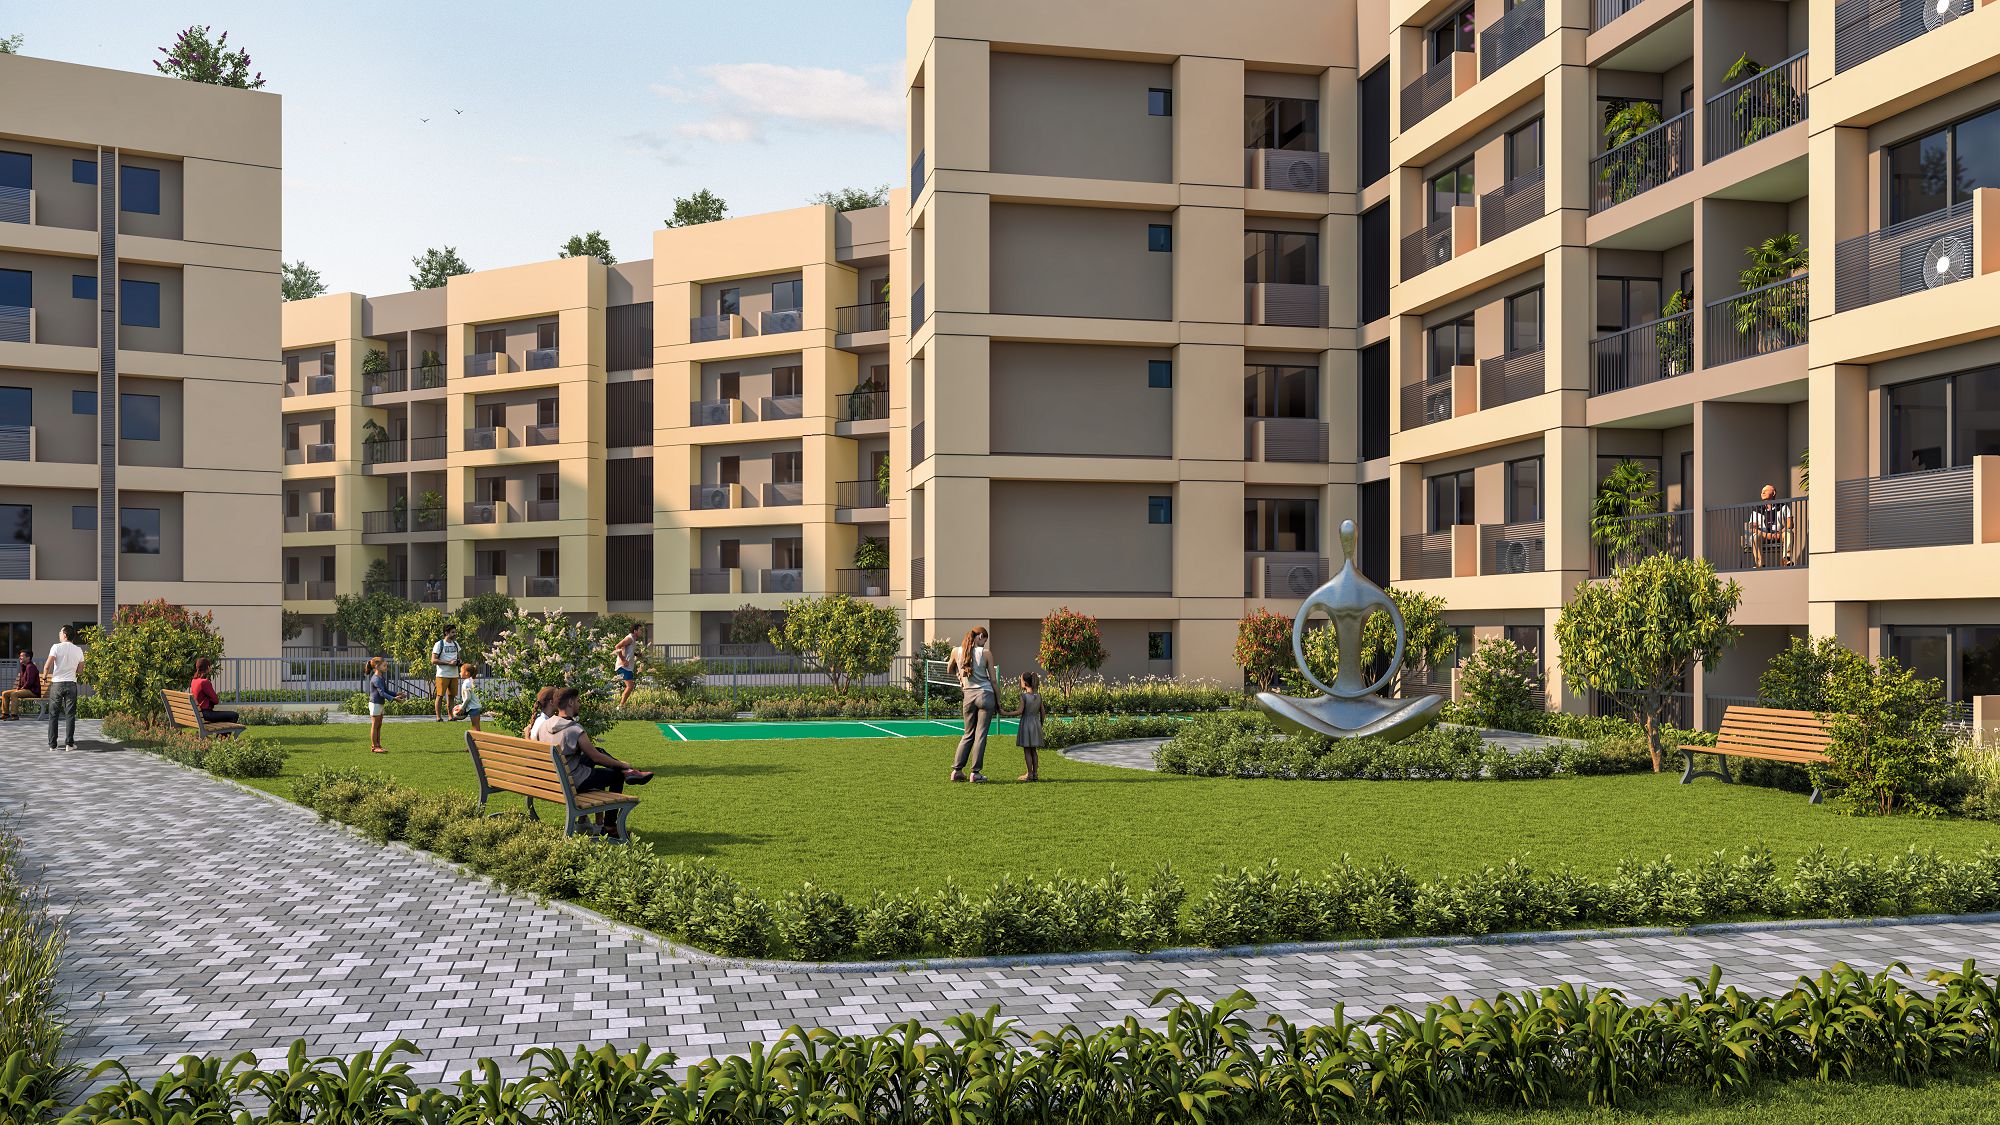 5 reasons to invest in real estate in Bhubaneswar